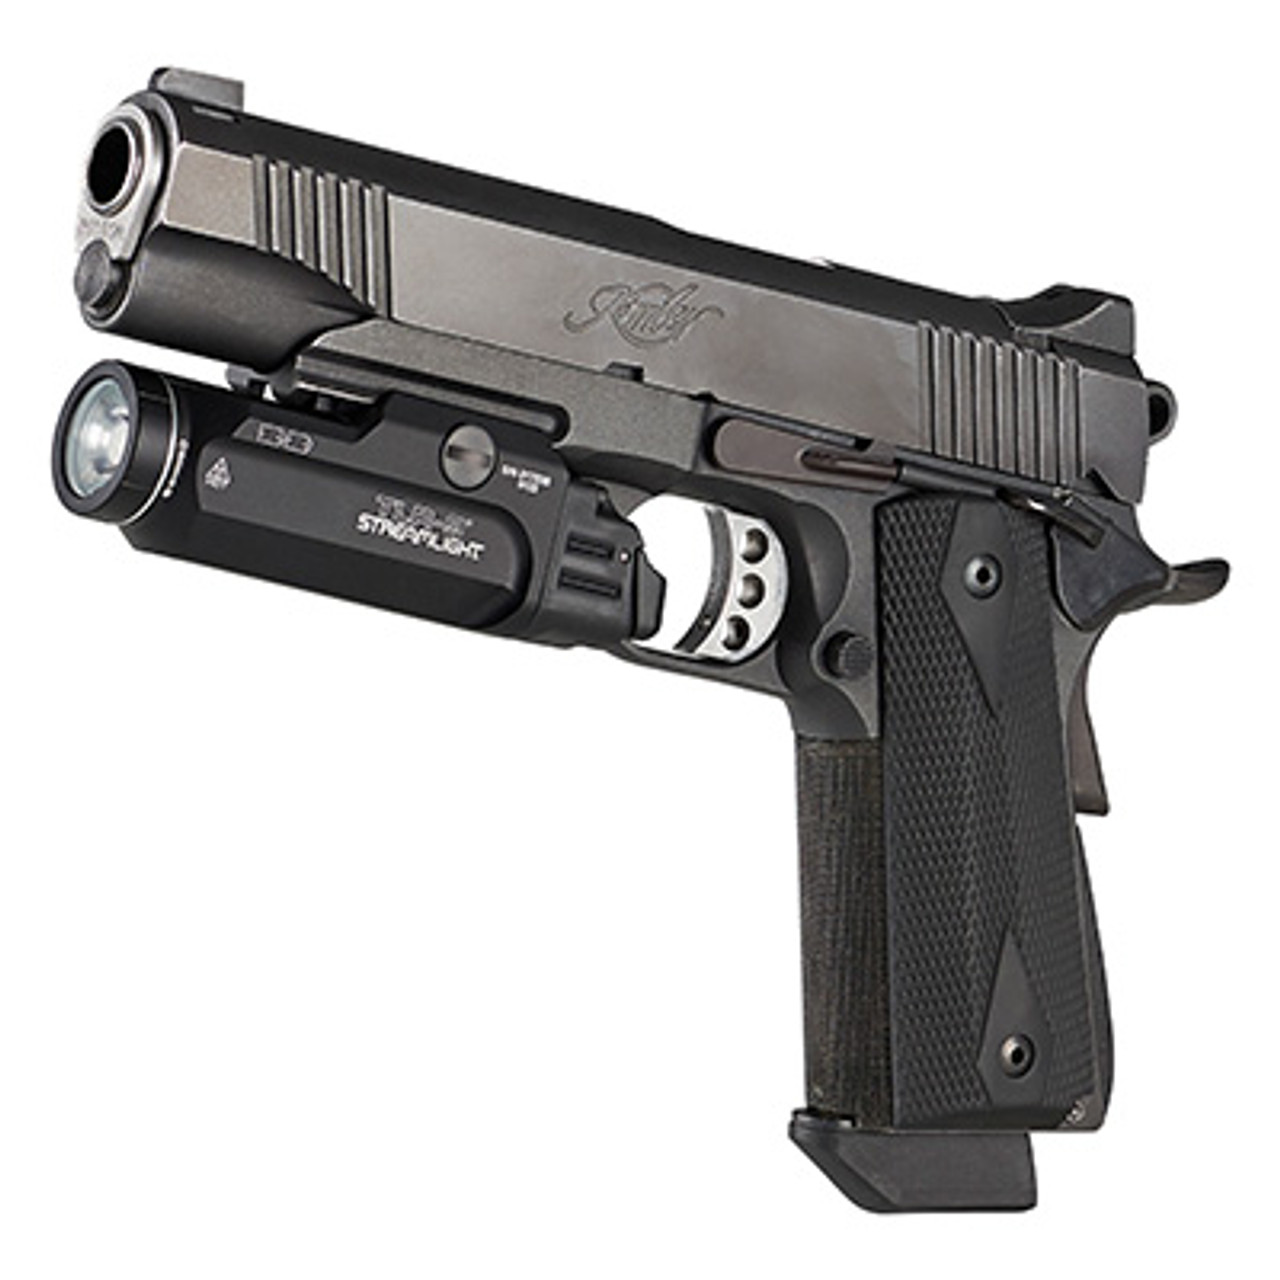 Streamlight TLR-9 Gun Light with Ambi Rear Switch Options